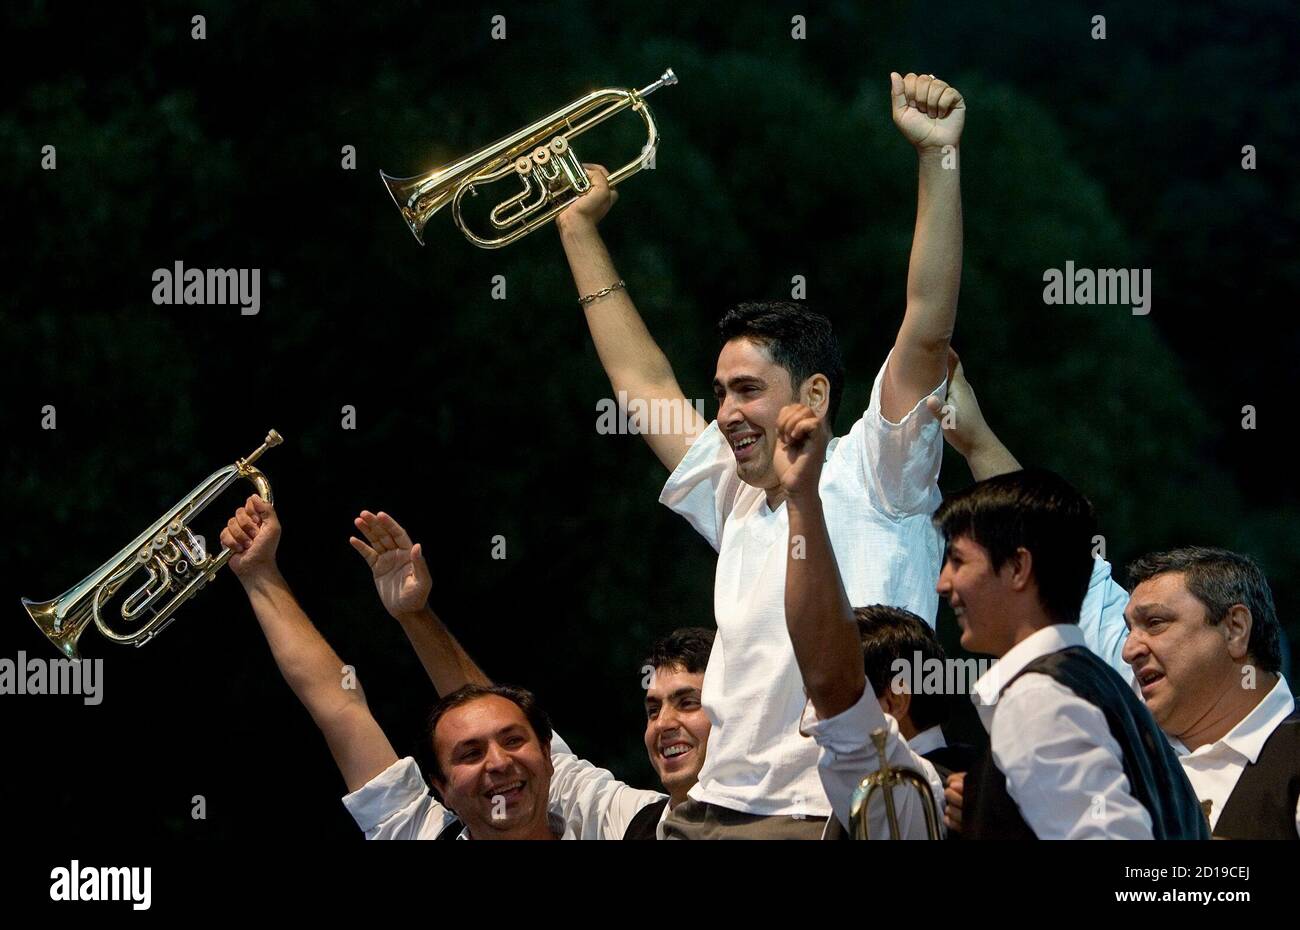 Serbian Trumpet High Resolution Stock Photography and Images - Alamy